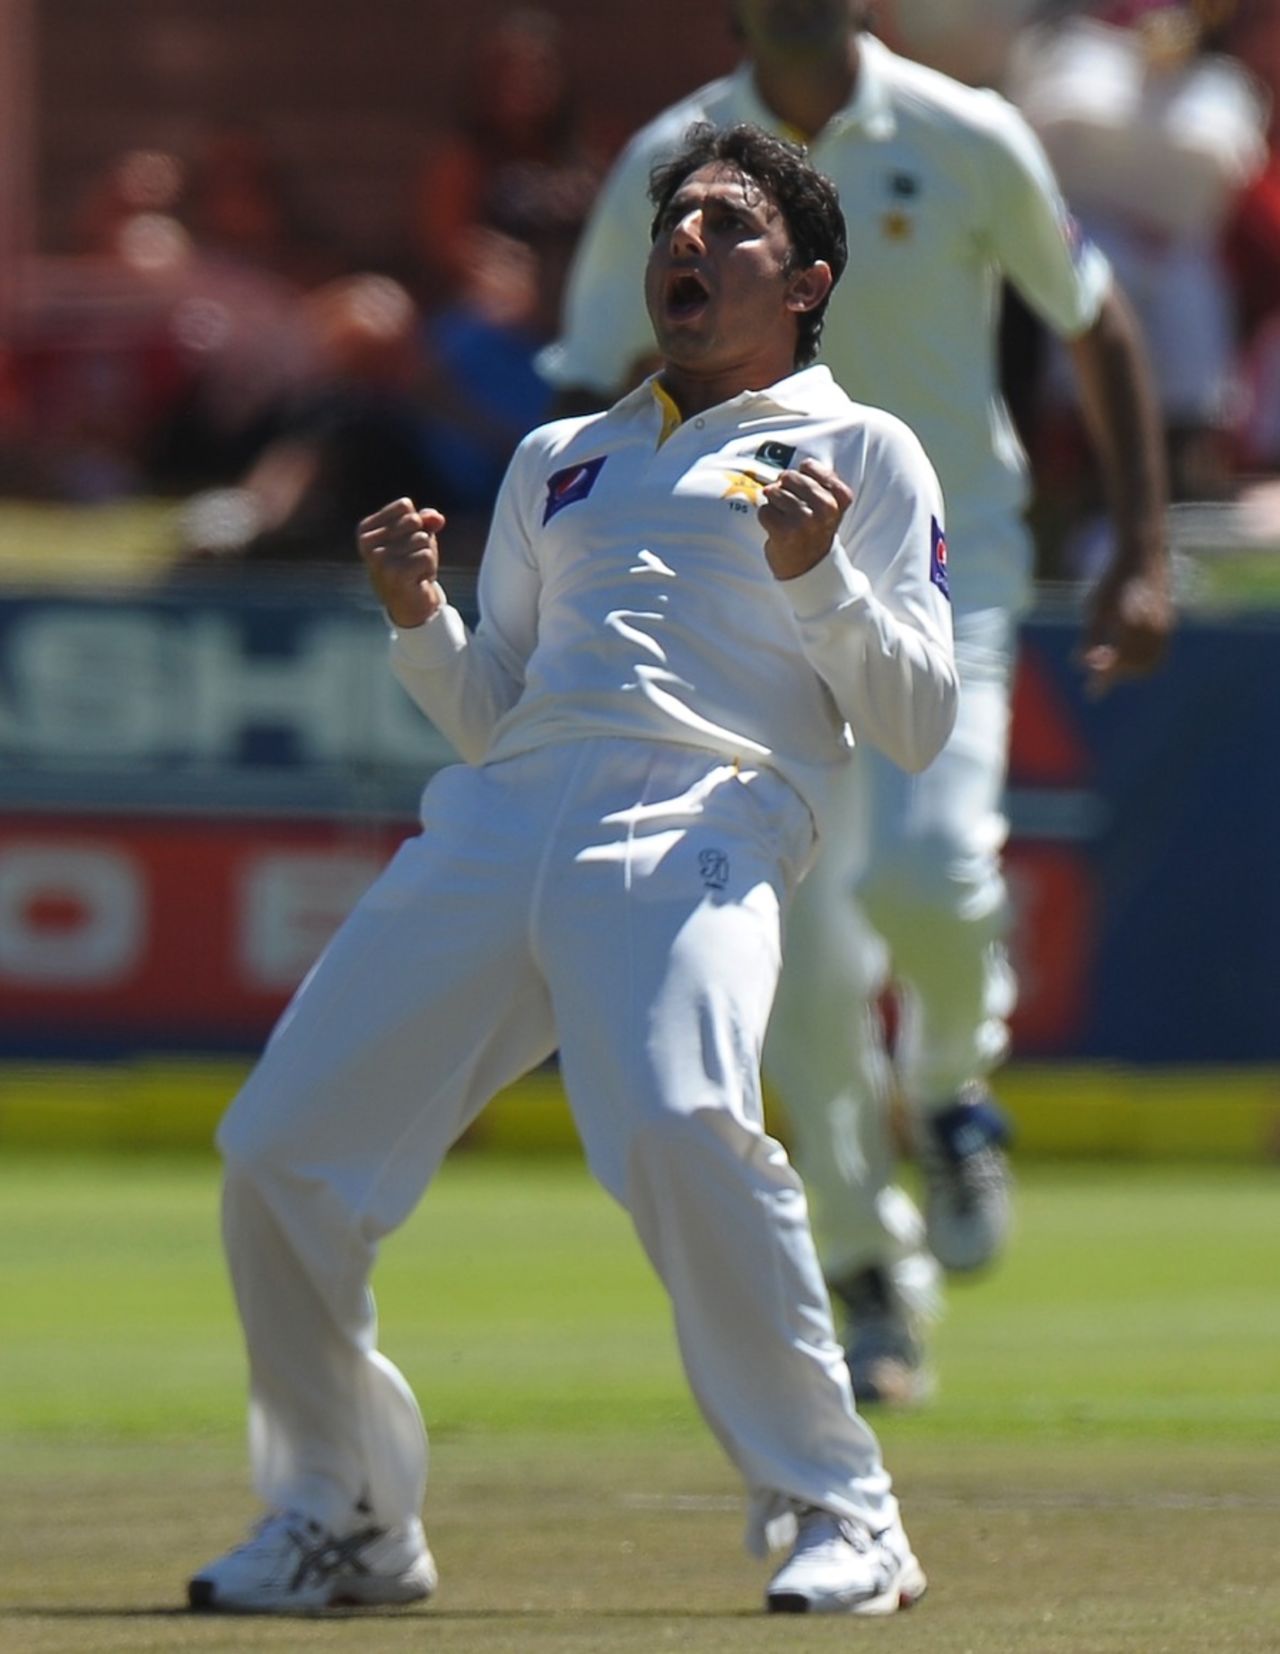 Saeed Ajmal celebrates the wicket of Dean Elgar, South Africa v Pakistan, 2nd Test, Cape Town, 3rd day, February 16, 2013